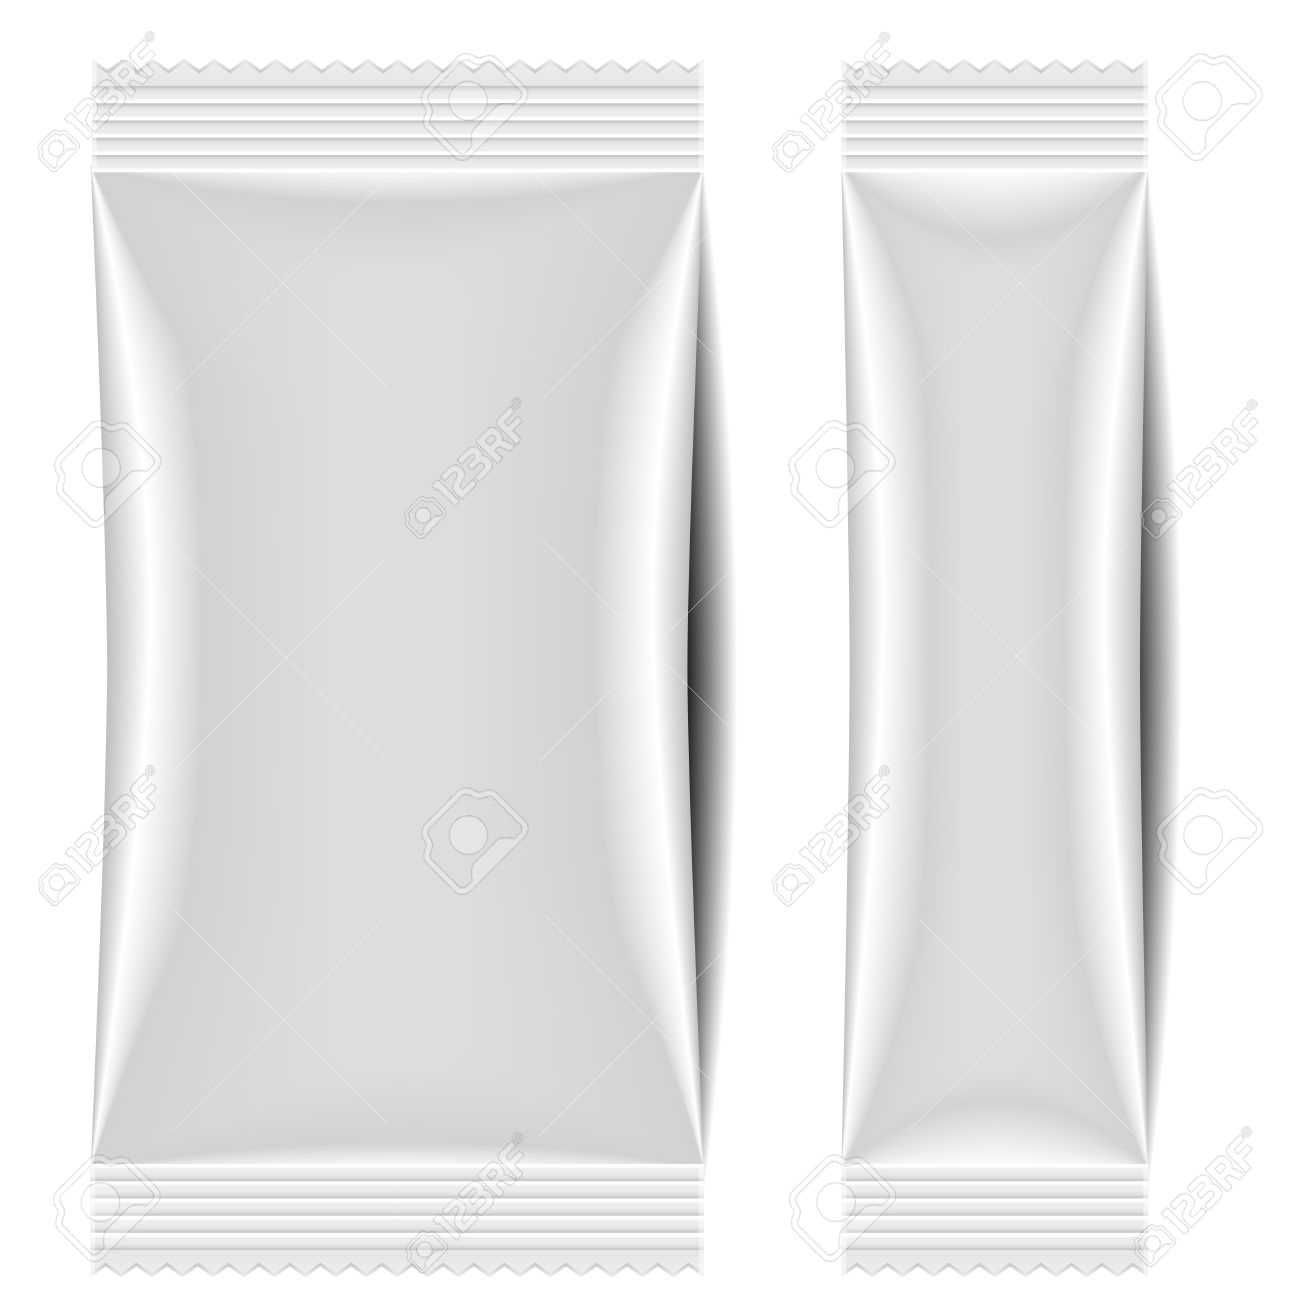 Detailed Illustration Of A Blank Sachet Packaging Template With Regard To Blank Packaging Templates